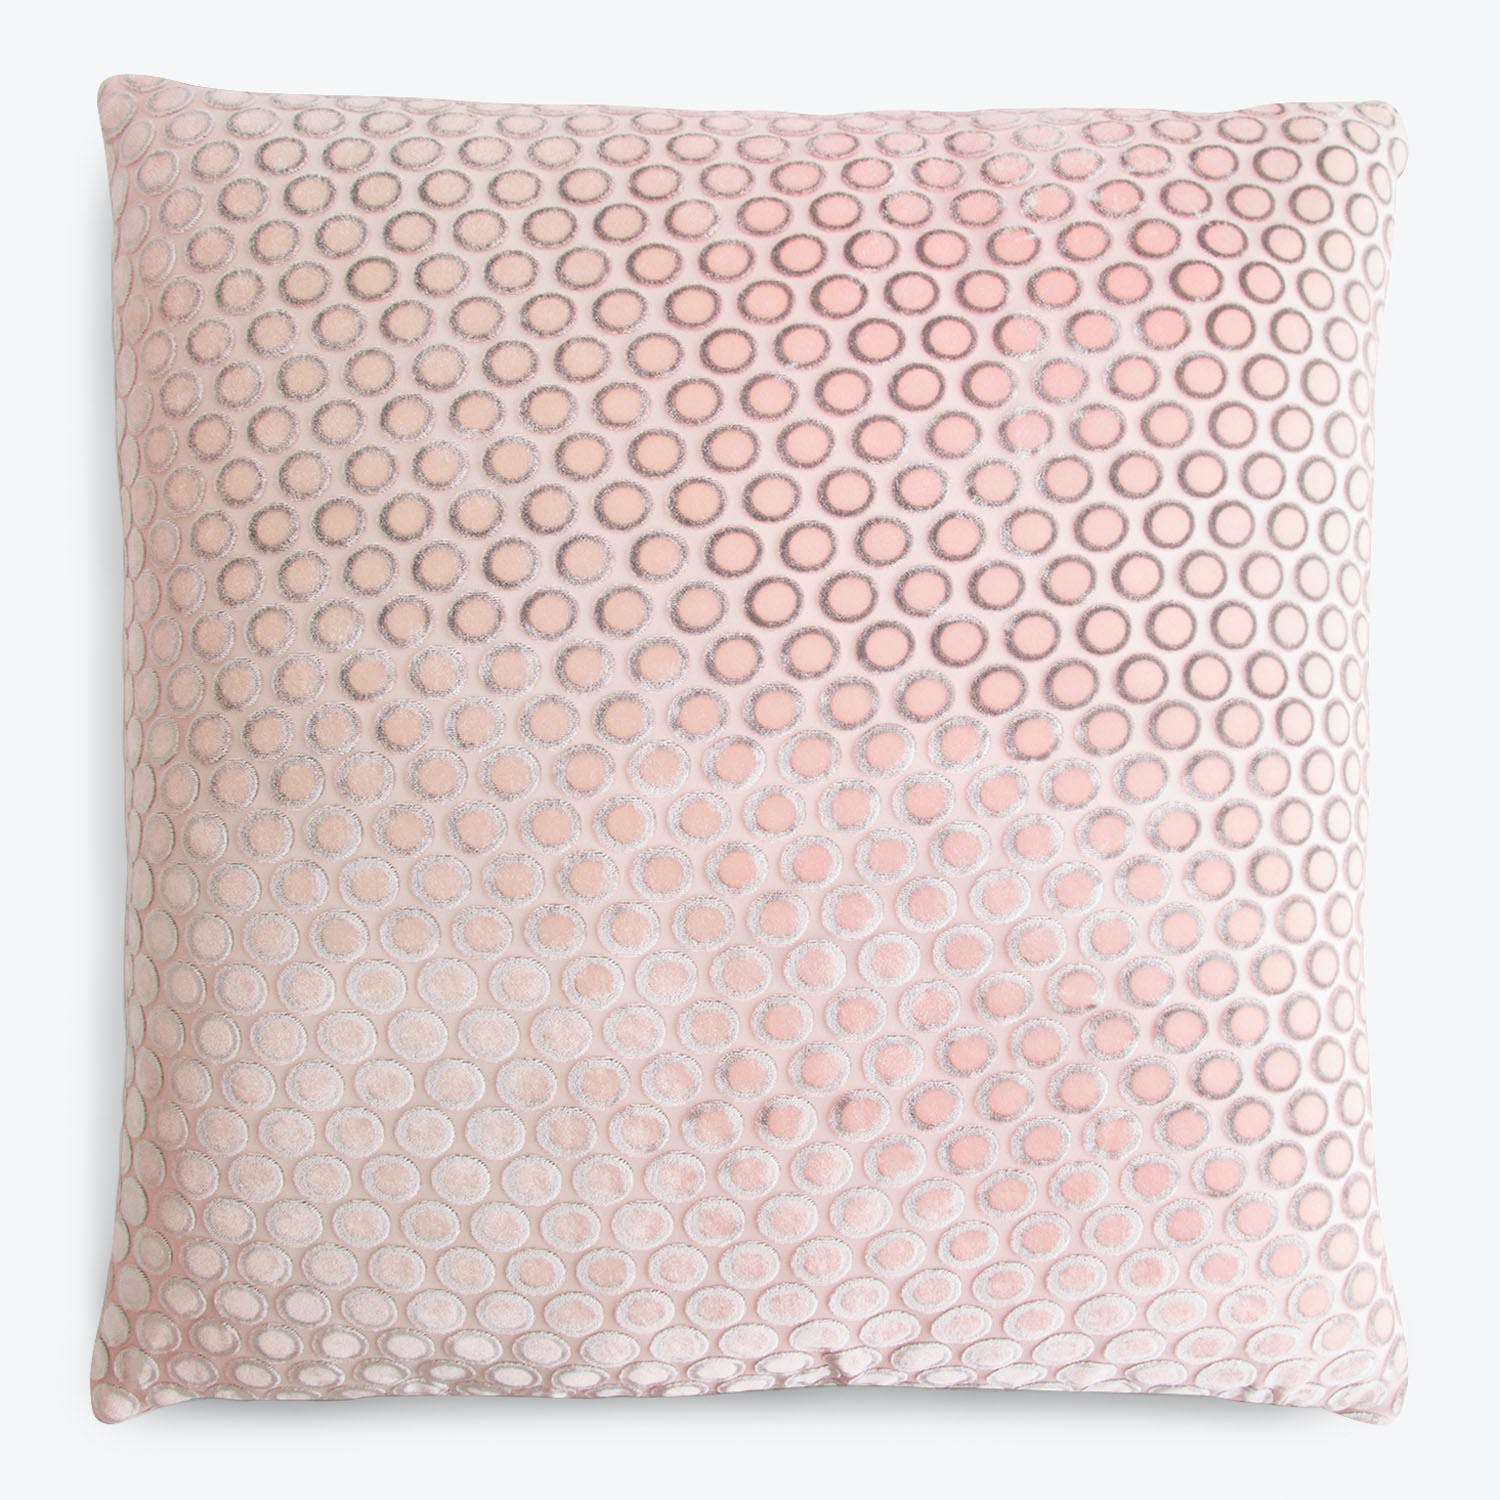 Square pillow with geometric design in shades of pink